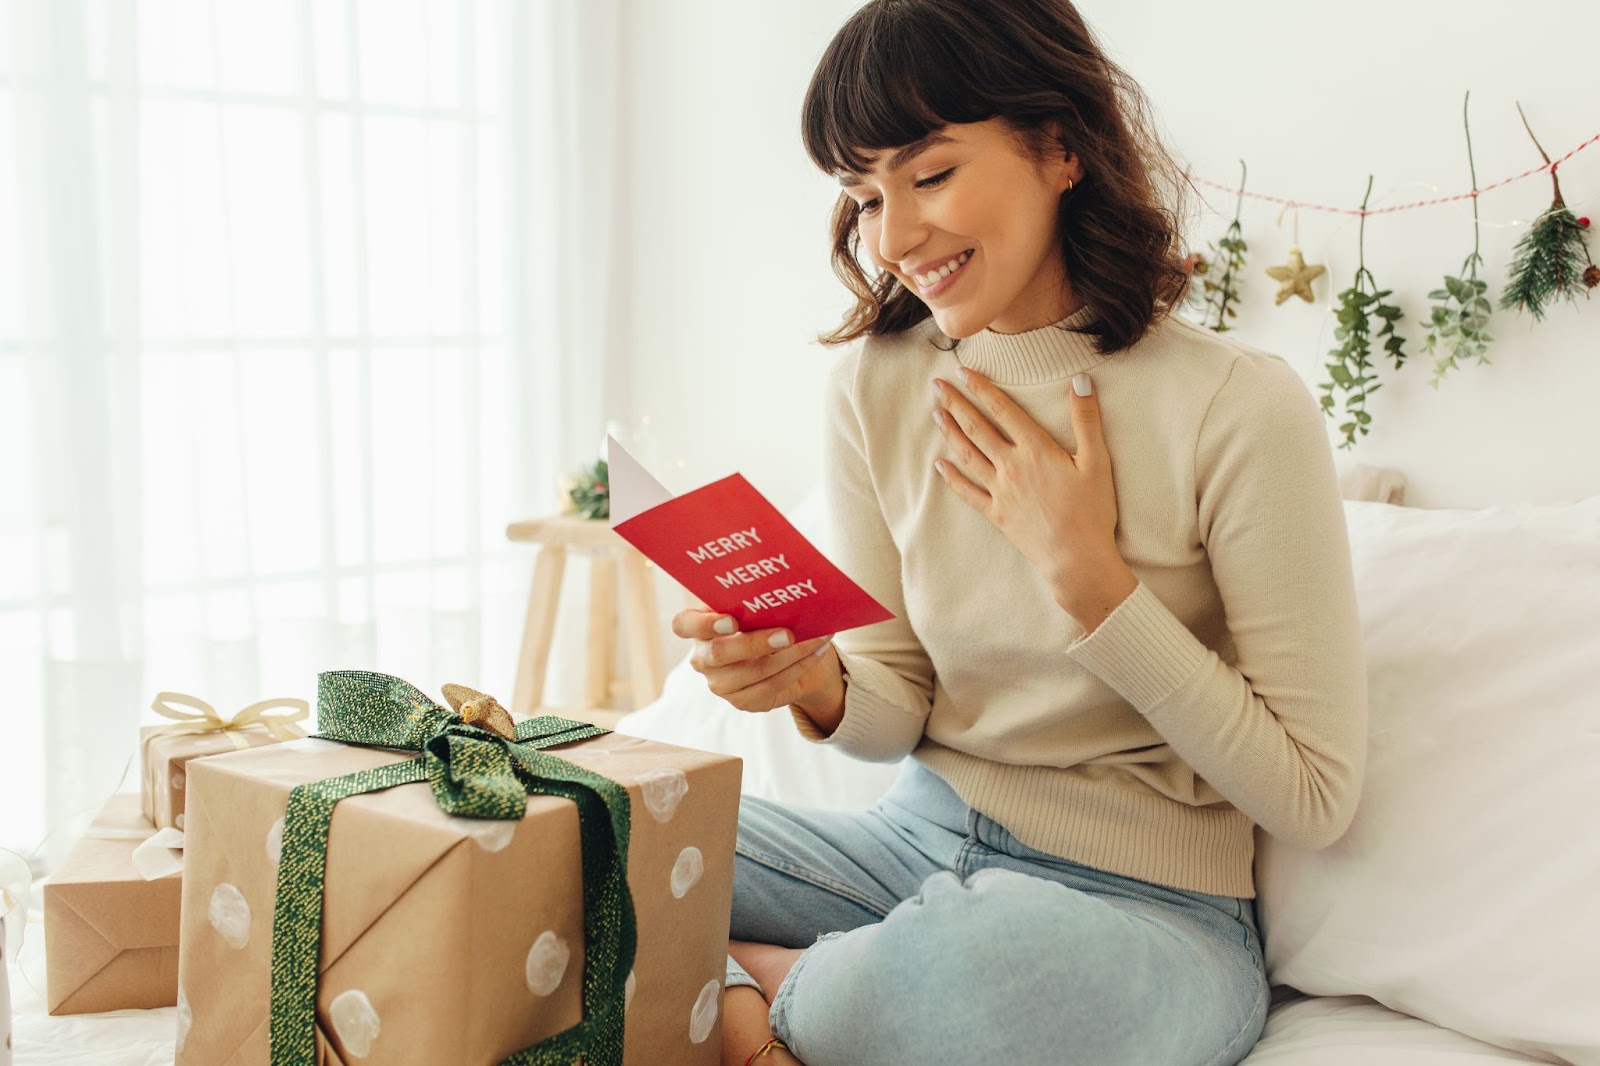 A woman reading a Christmas card that says “Merry Merry Merry”